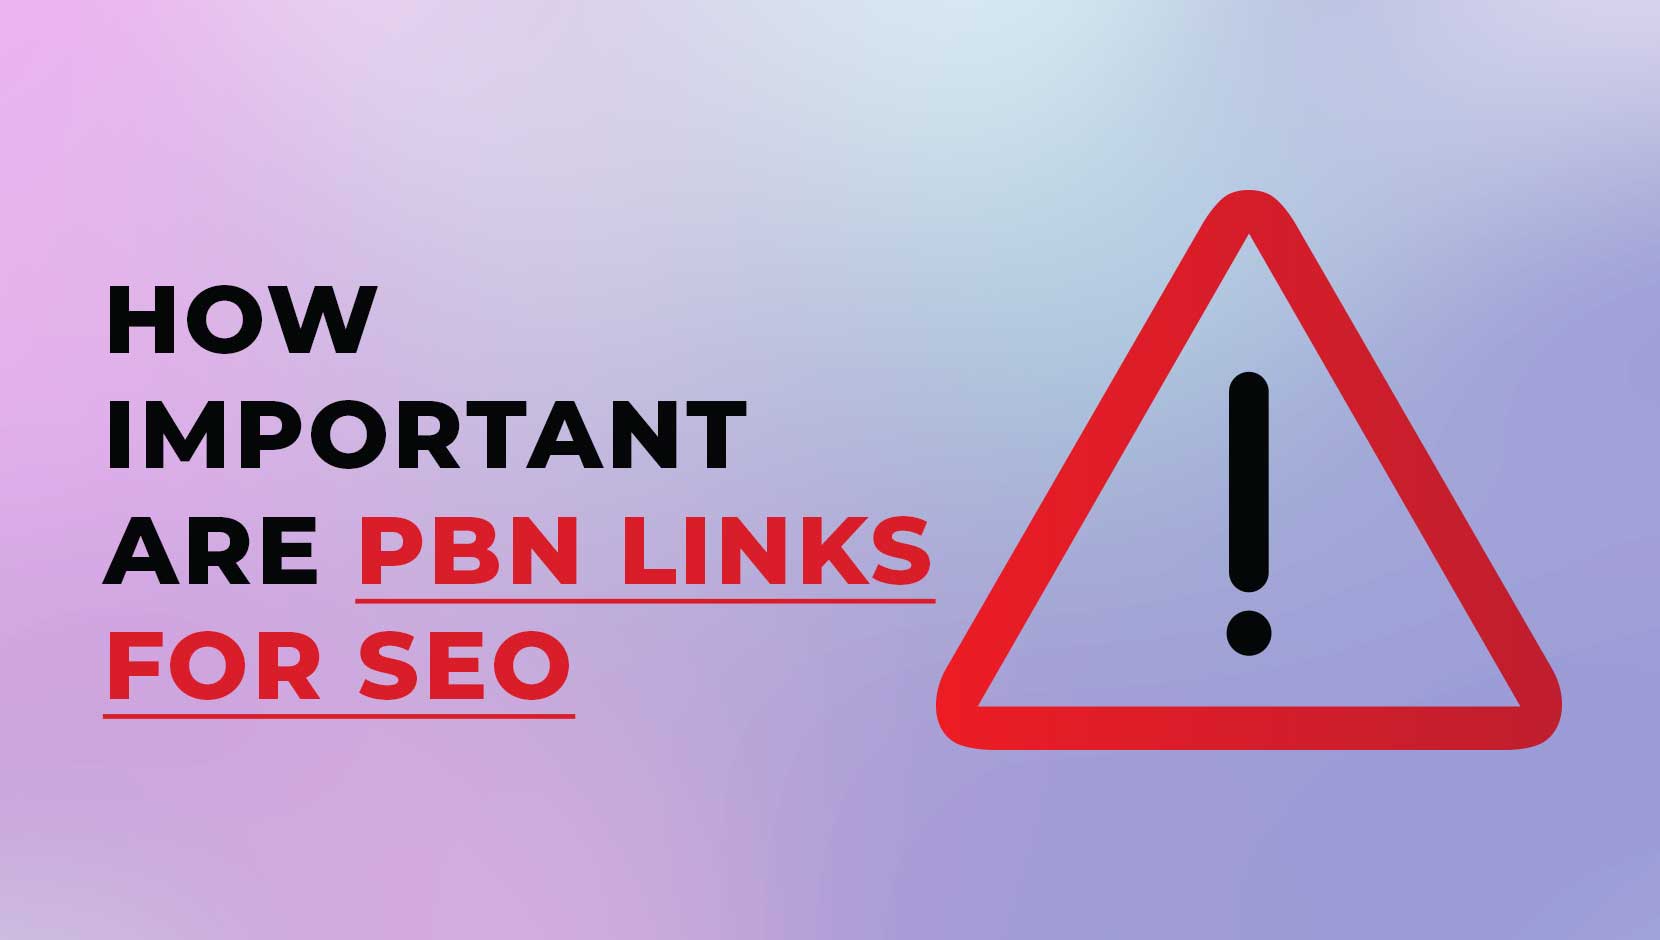 how-important-are-pbn-links-for-seo.jpg